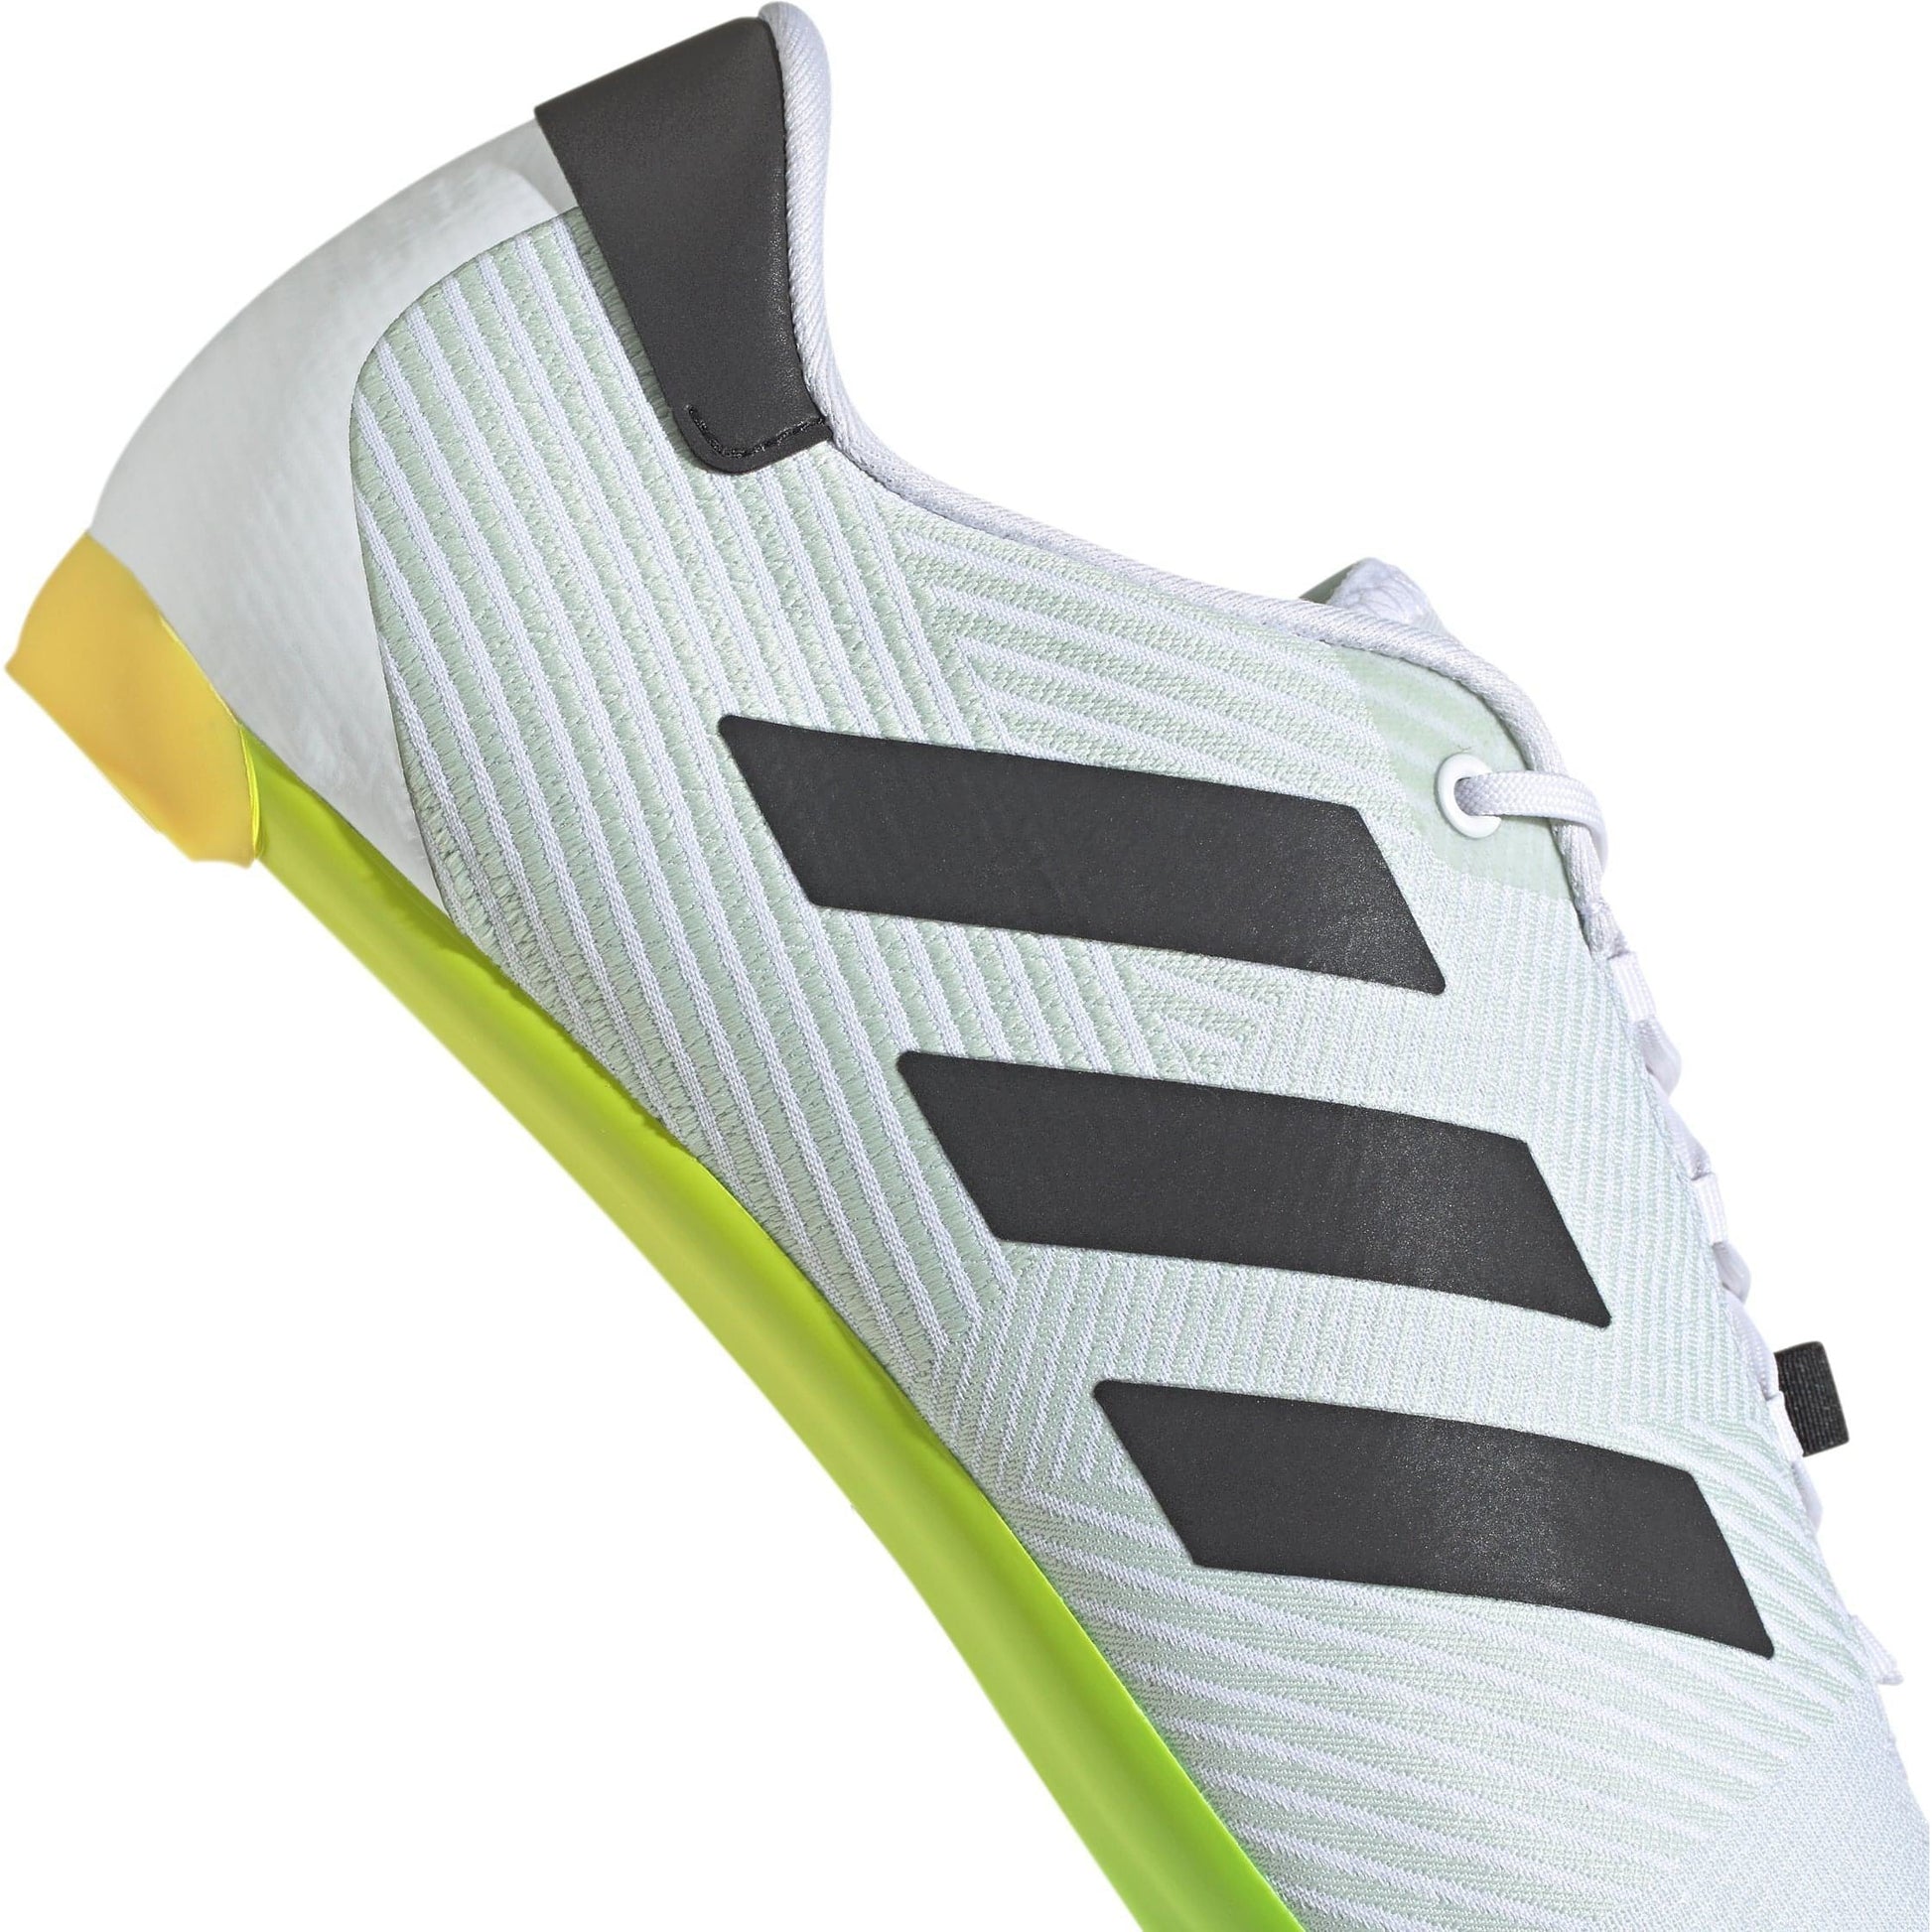 Adidas The Road Cycling Shoes Gx1661 Details